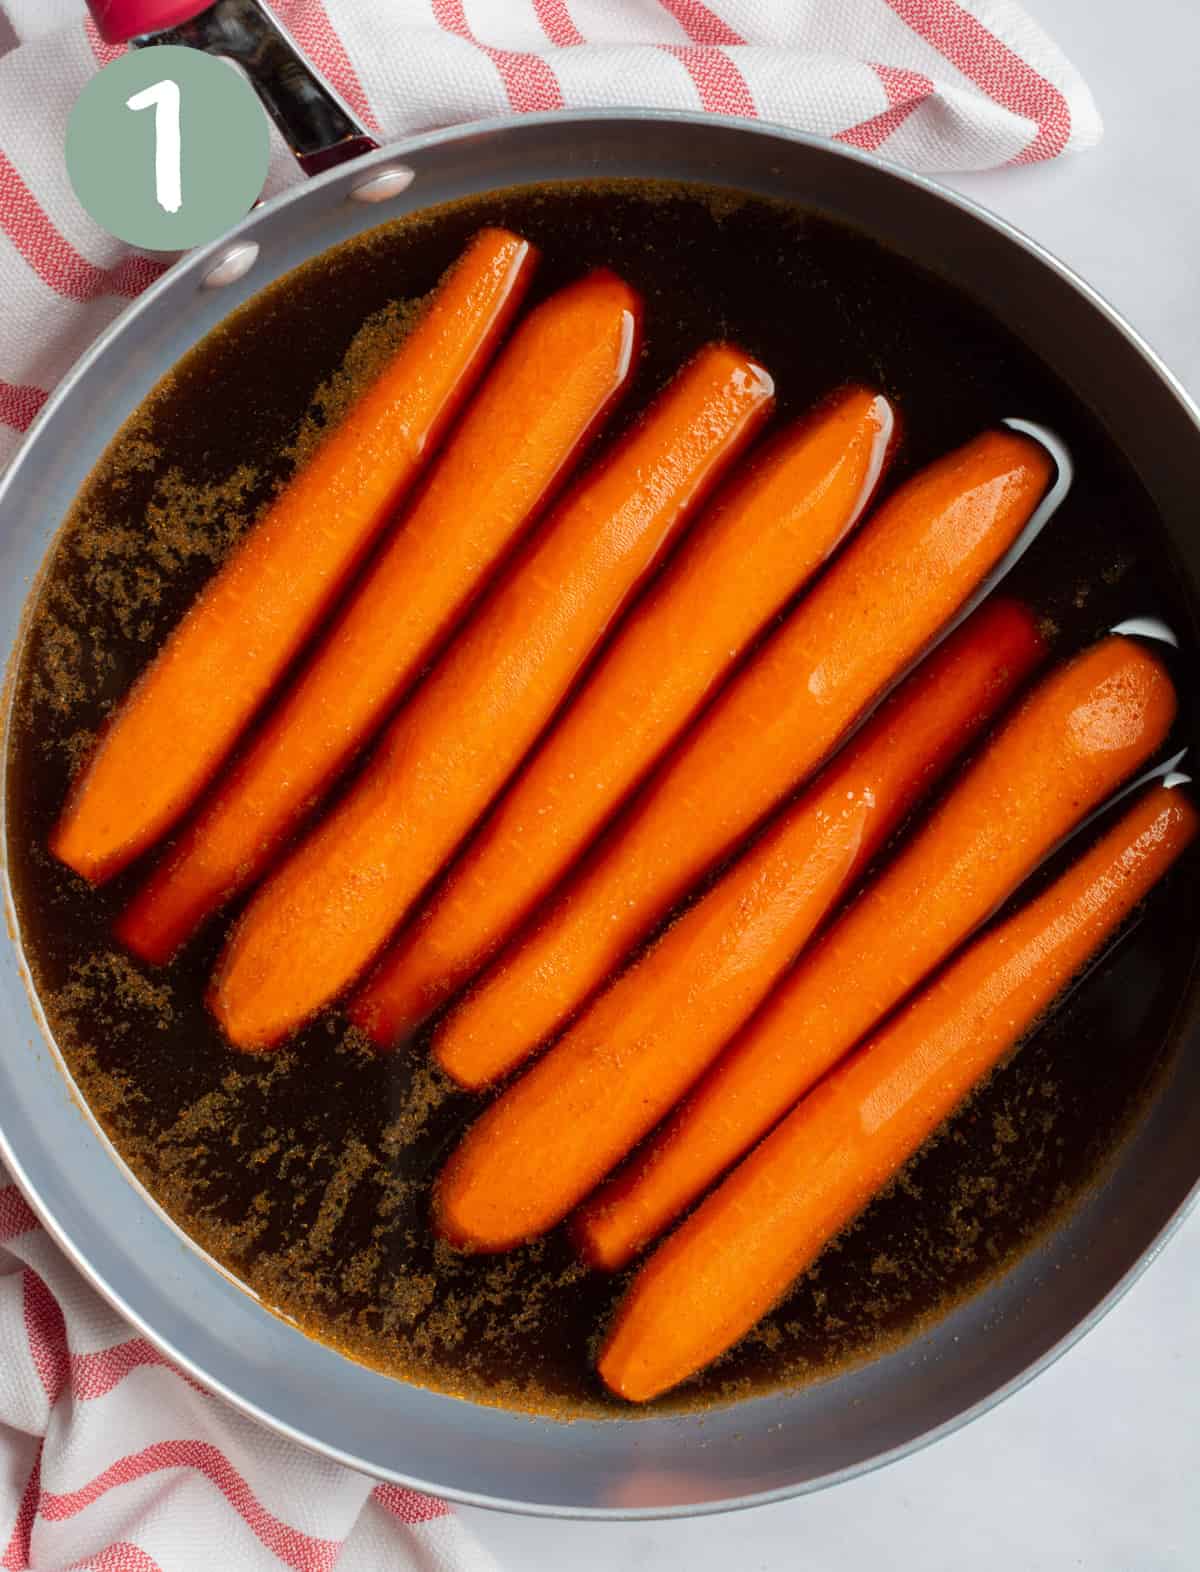 Carrots shaped into a hot dog in a pan with marinade.